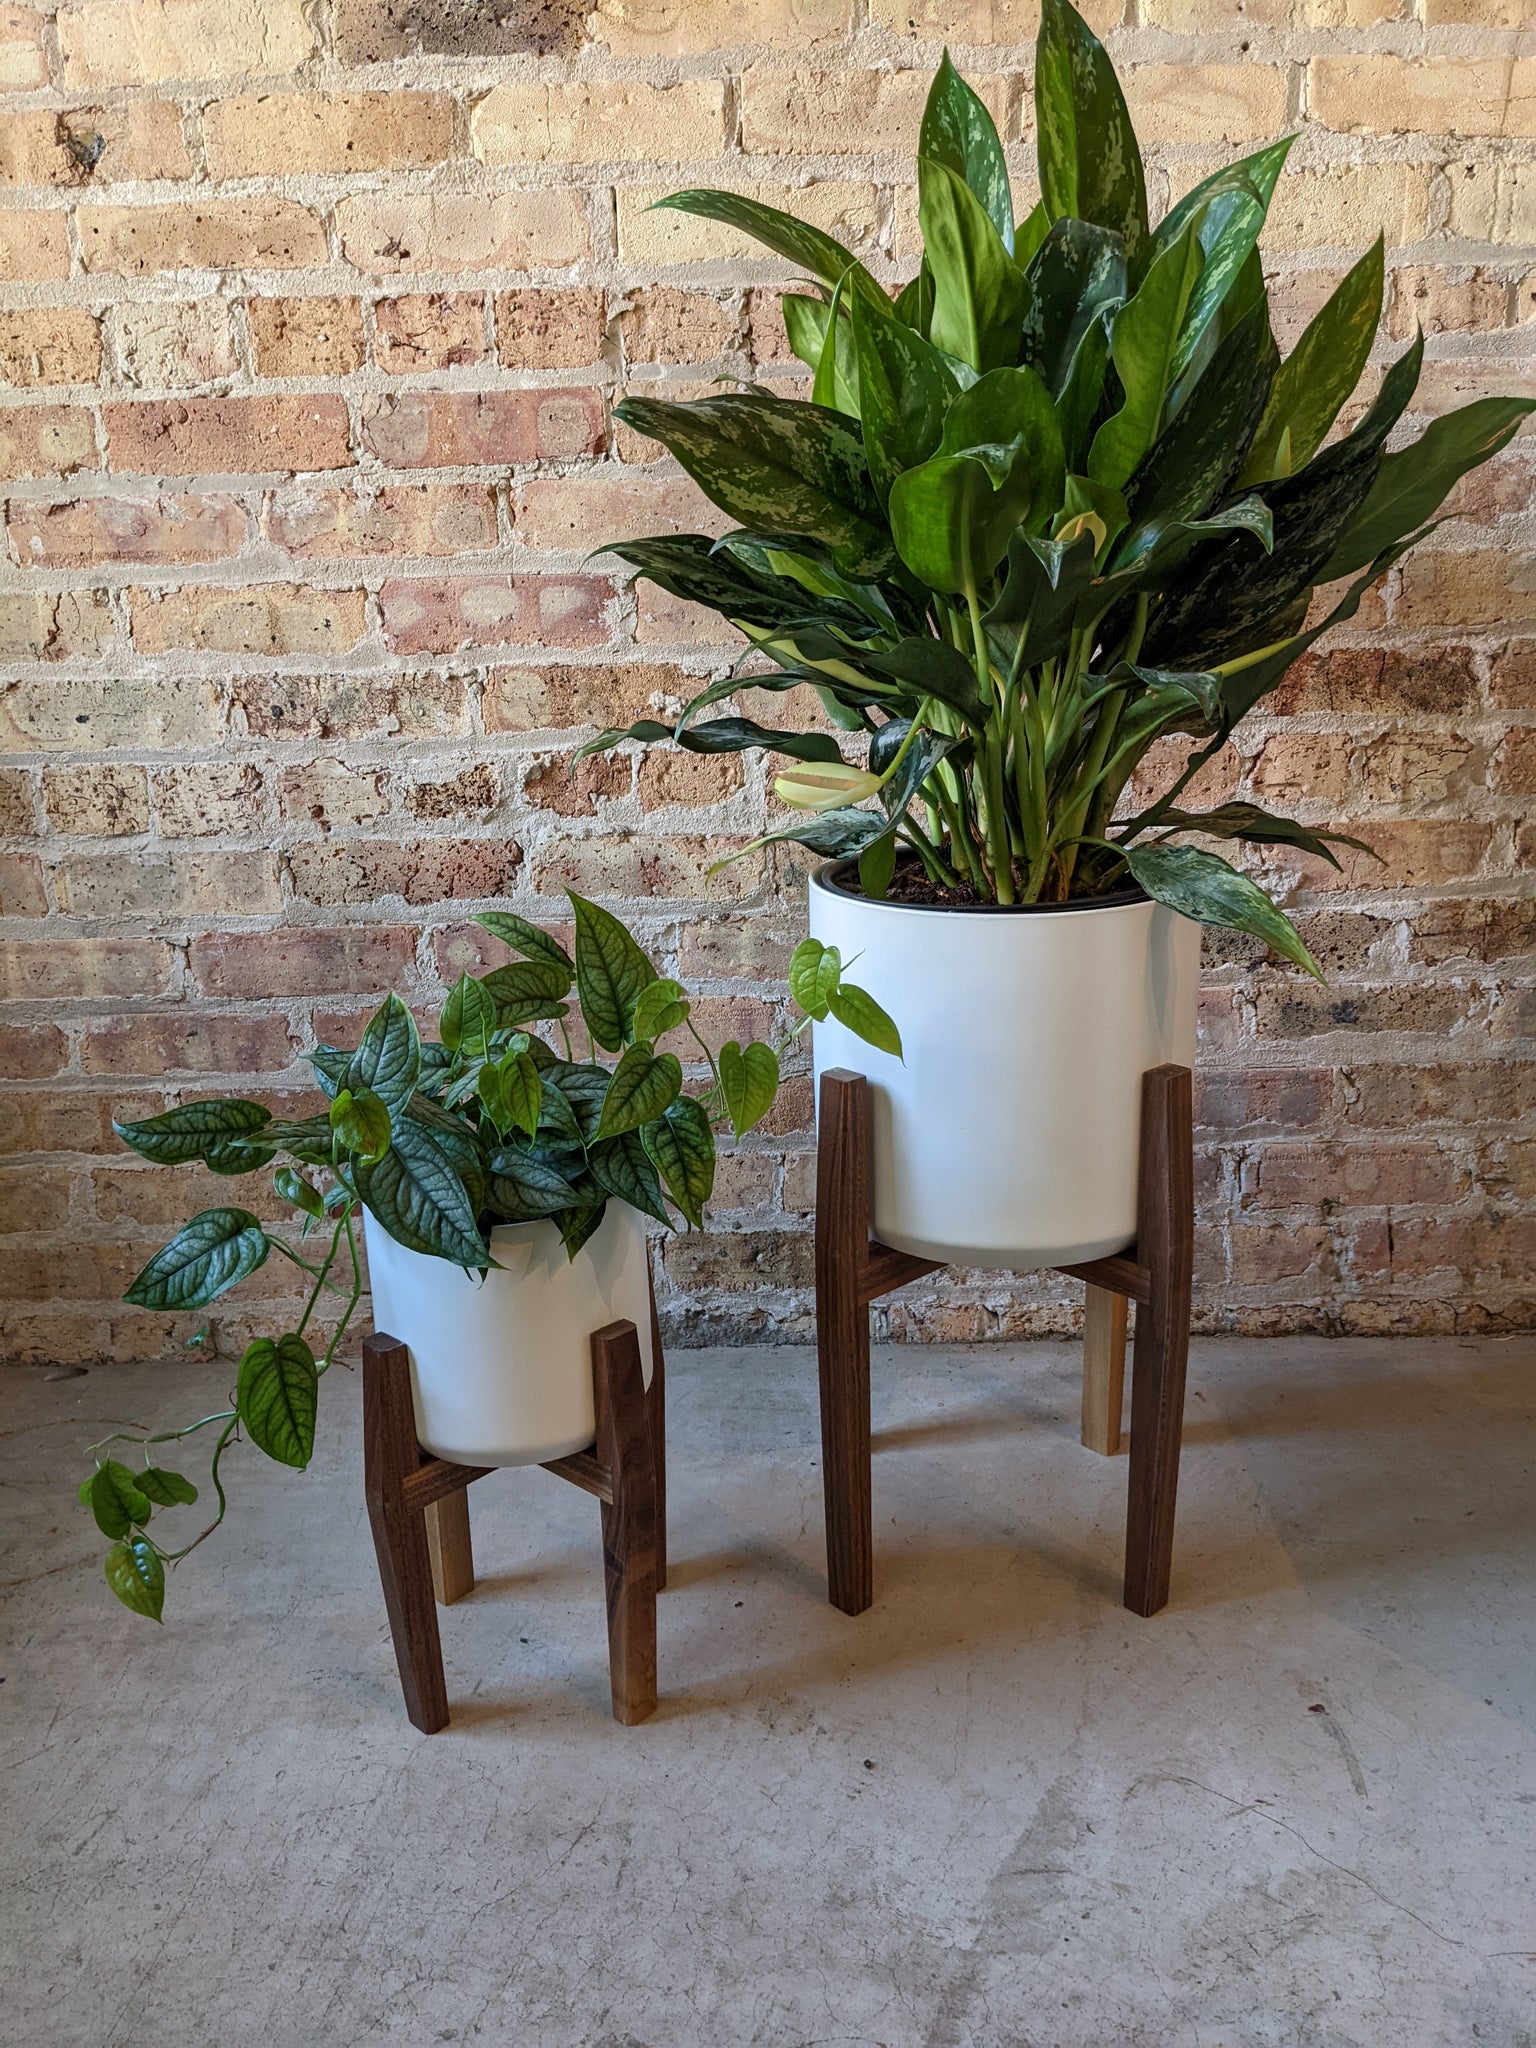 Locally crafted handmade walnut plant stand; Chicago houseplant gifts